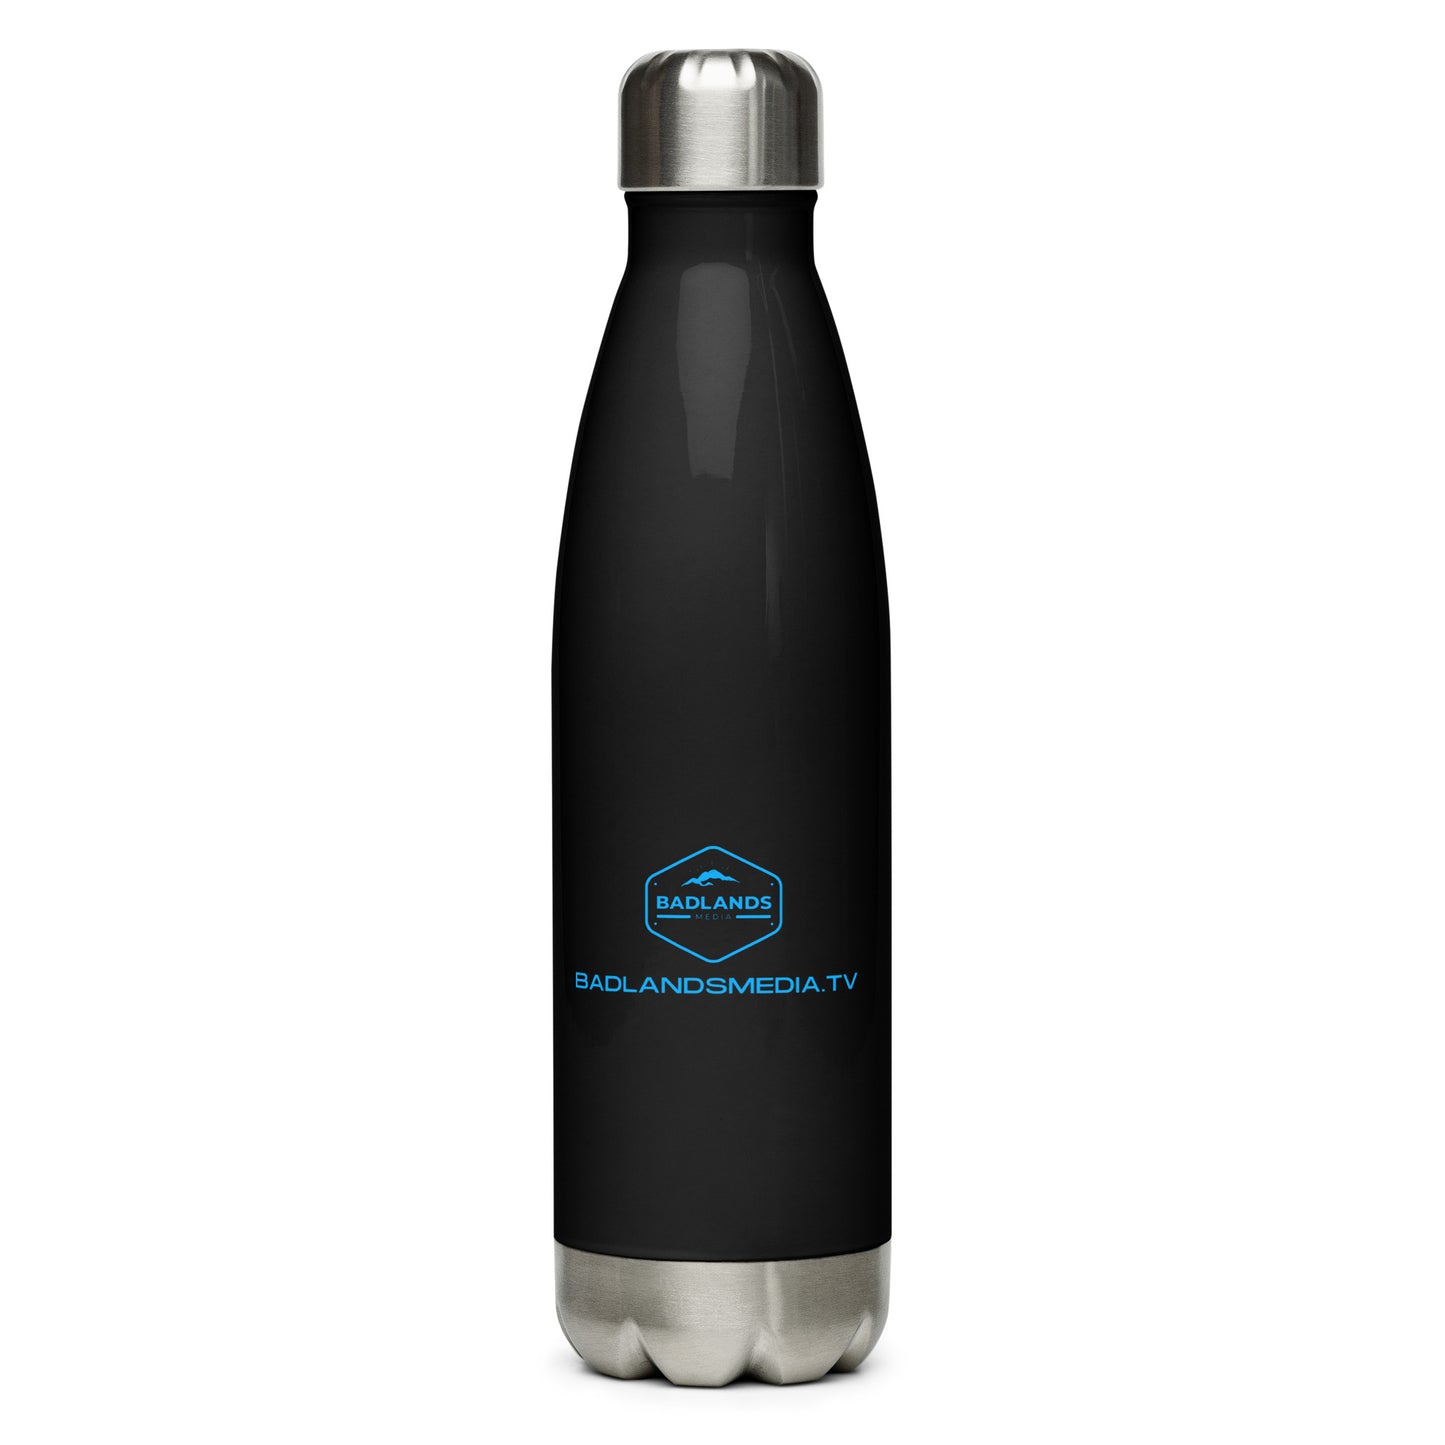 Altered State Stainless steel water bottle